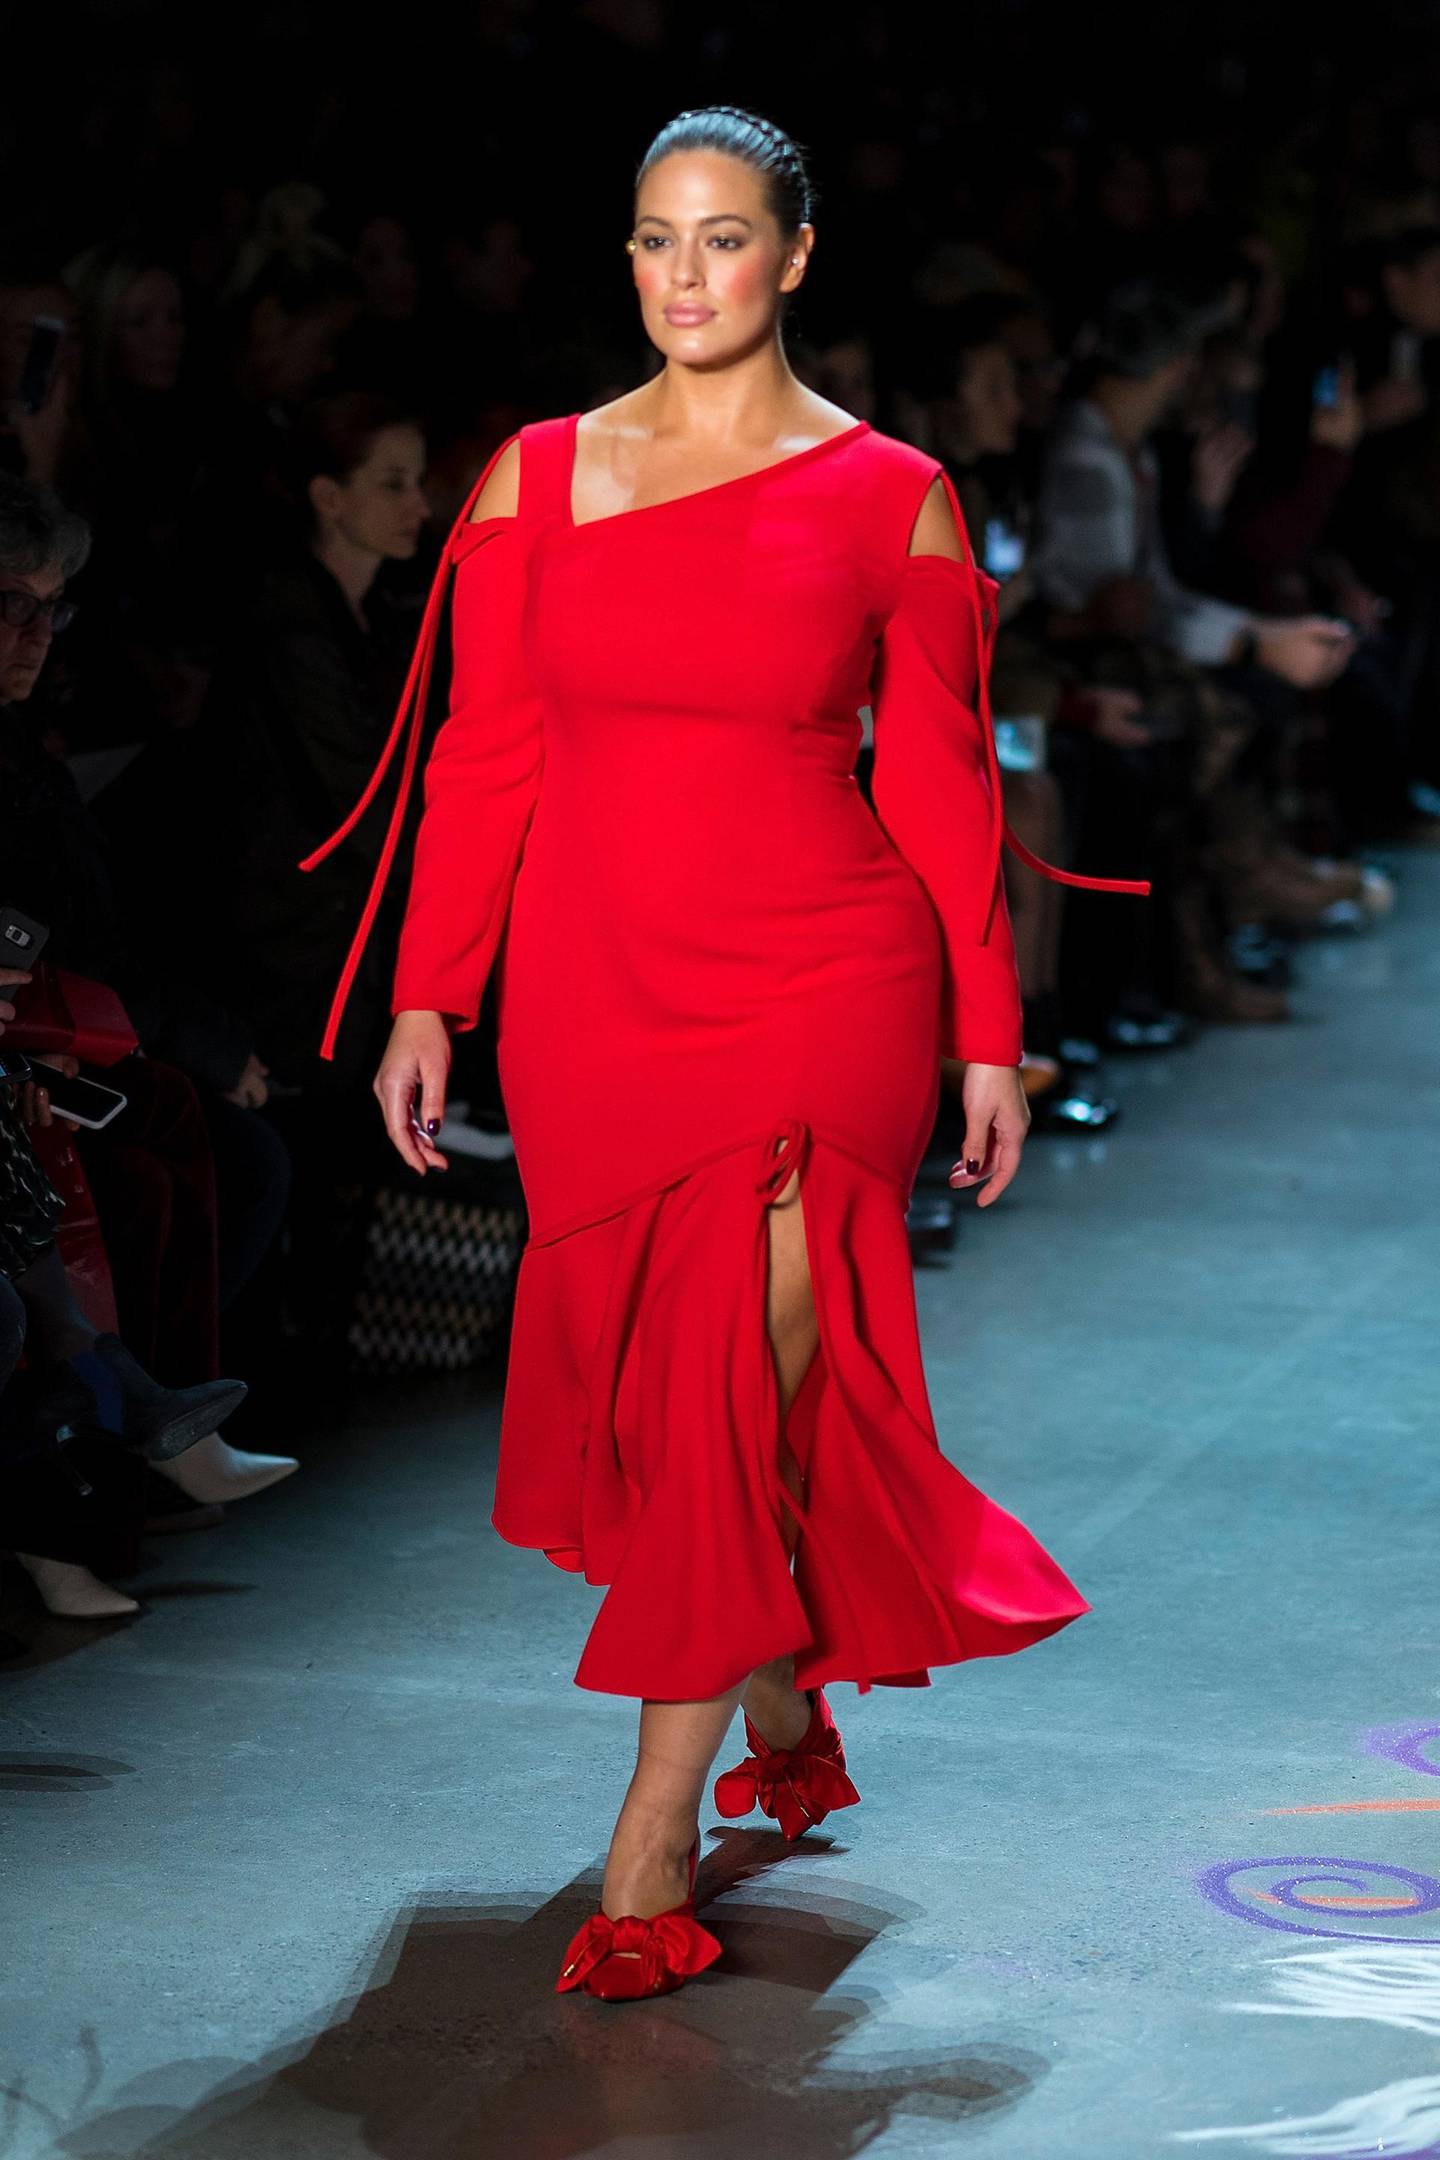 NEW YORK, NY - FEBRUARY 11:  Ashley Graham walks the runway during the Prabal Gurung fashion show during New York Fashion Week at Gallery I at Spring Studios on February 11, 2018 in New York City.  (Photo by Michael Stewart/WireImage/Getty Images)